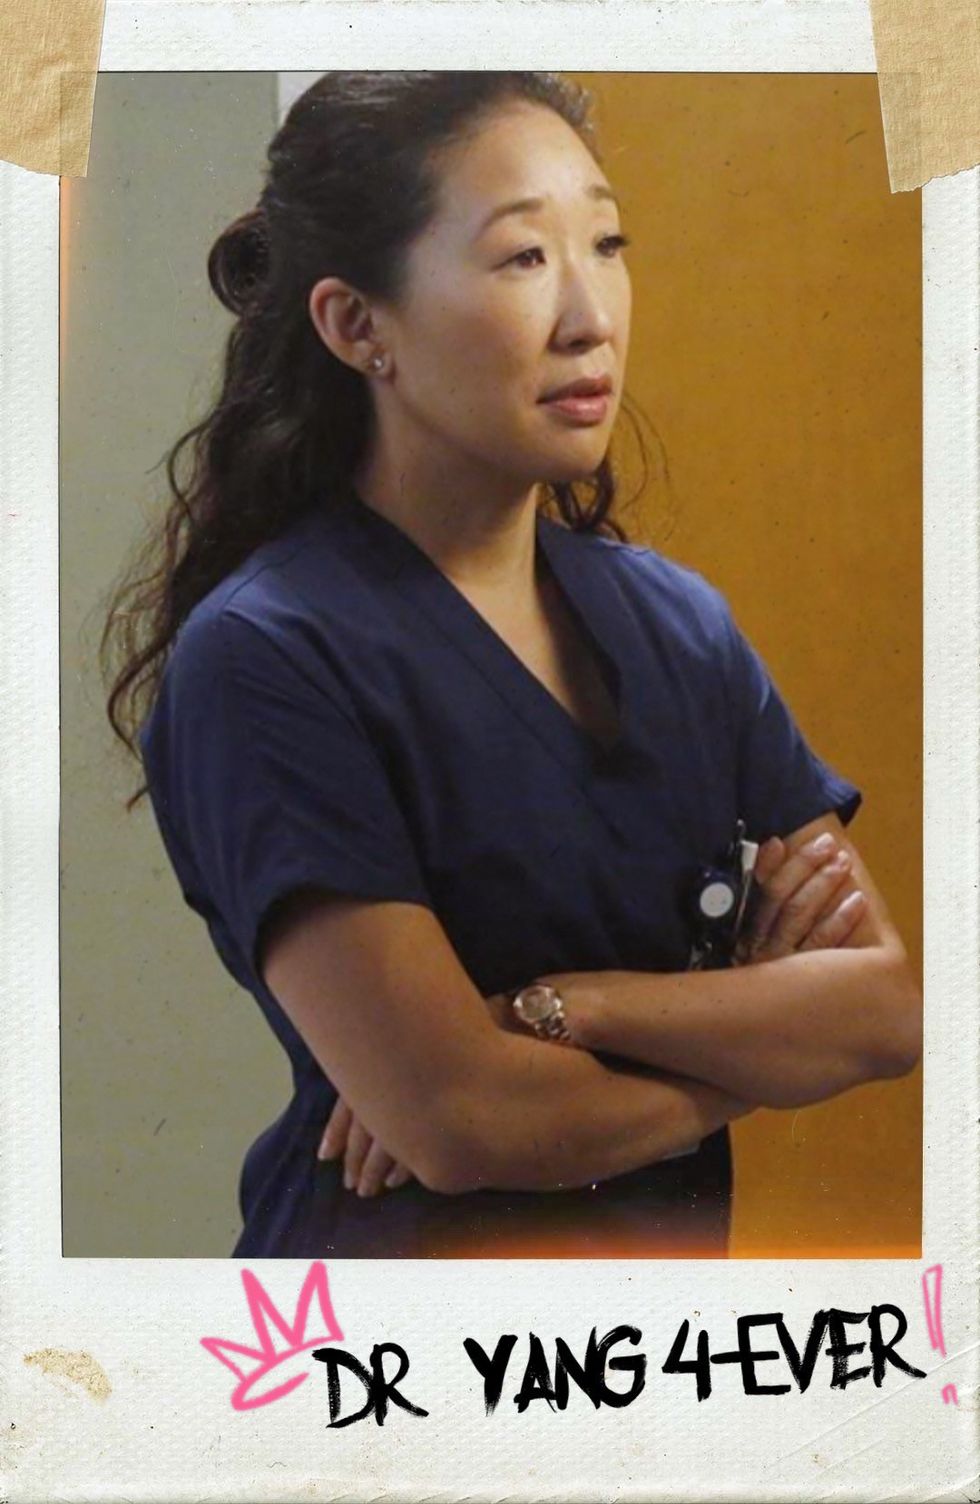 The Complete Guide To The Cast of Grey's Anatomy: What Happened and Where Are They Now? Dr. Cristina Yang / Shonda Rhimes 